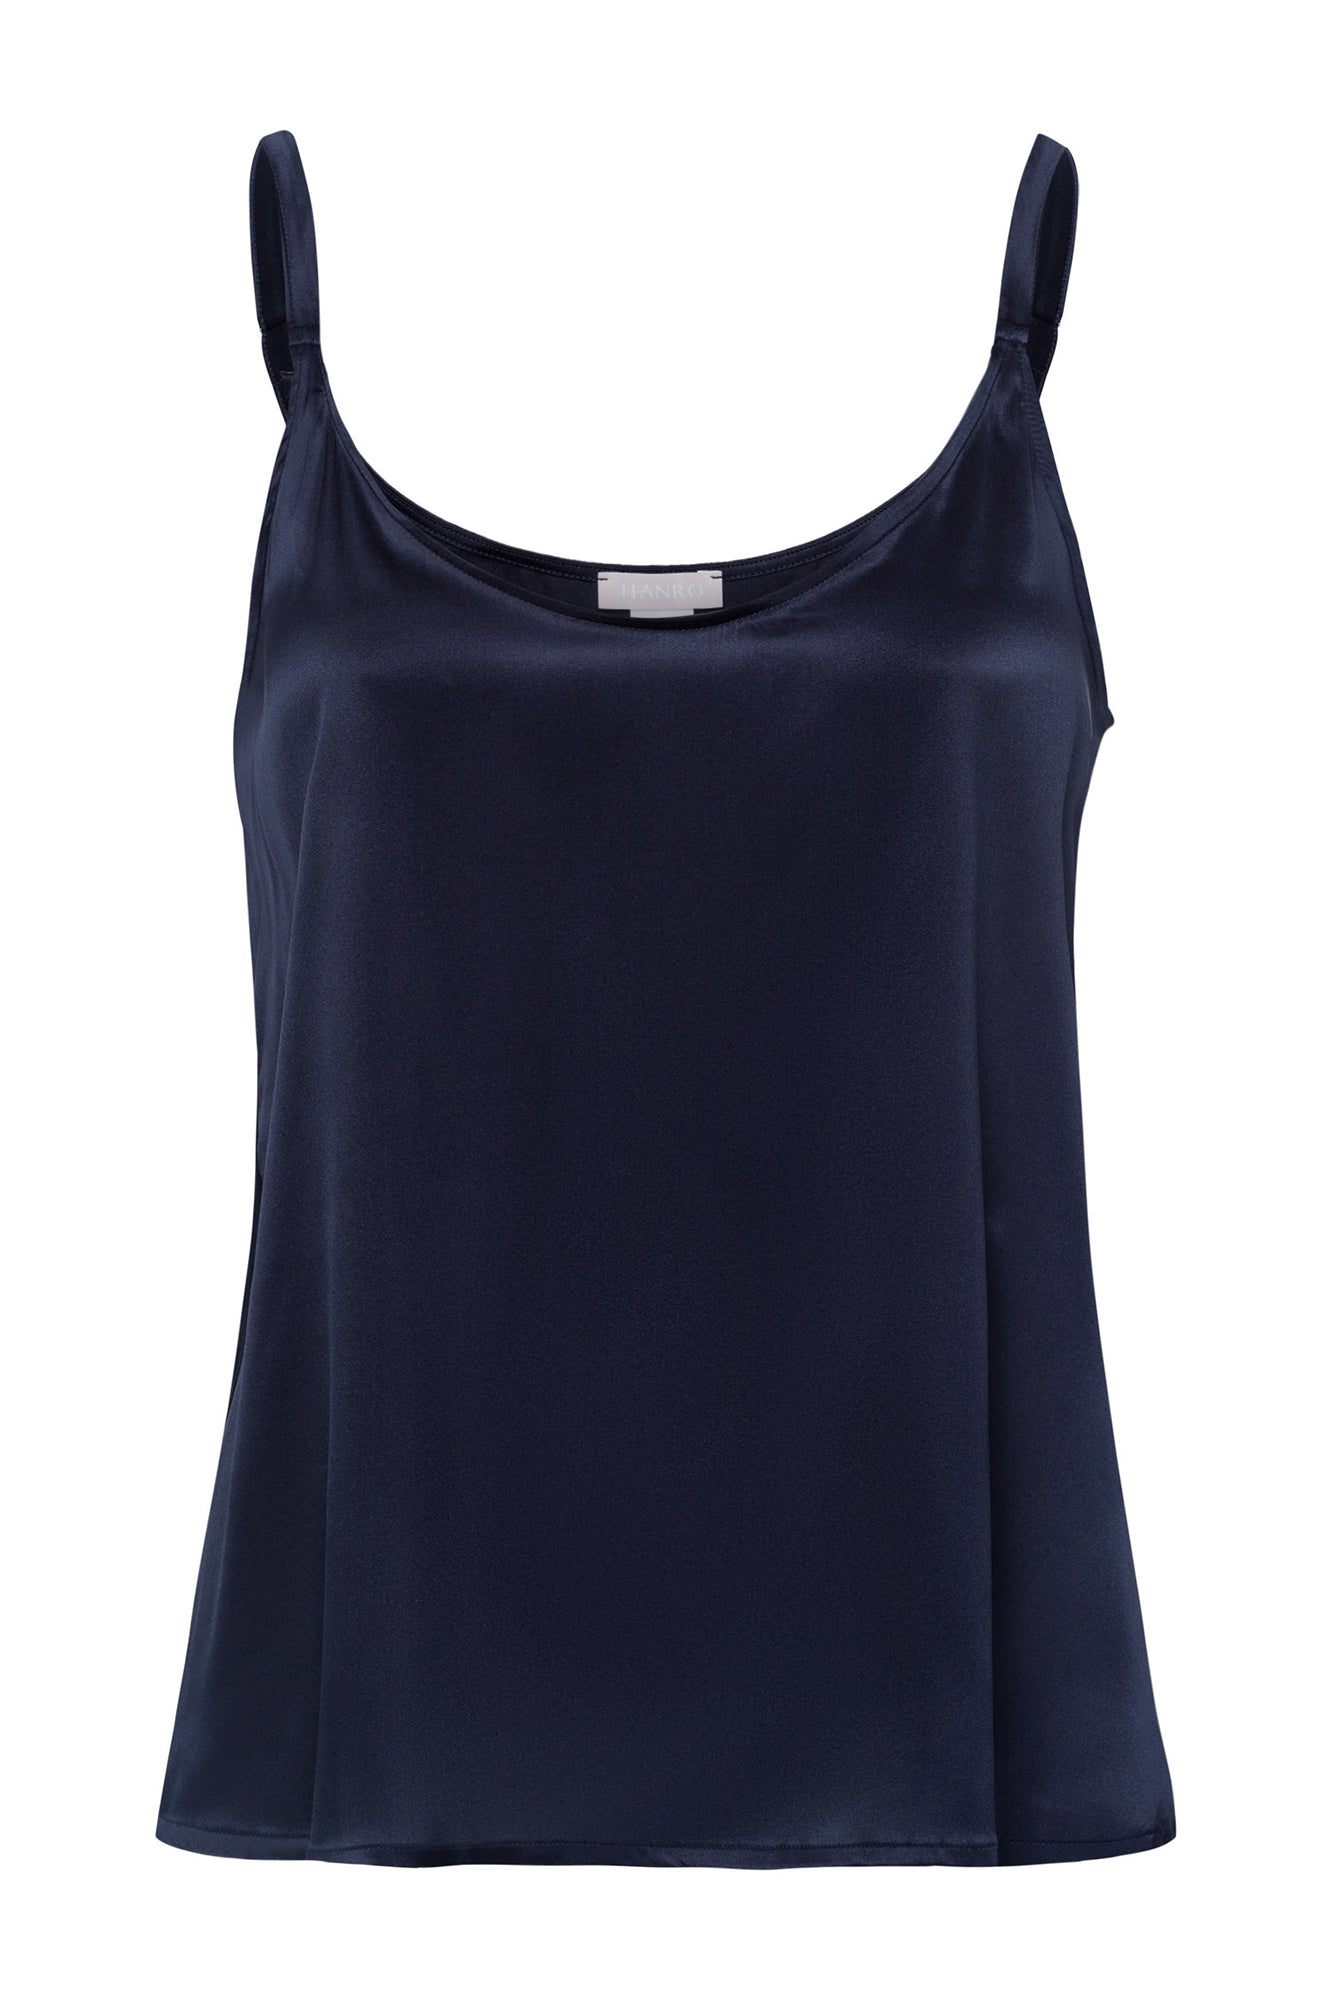 The Grand Central Spaghetti Top By HANRO In Deep Navy